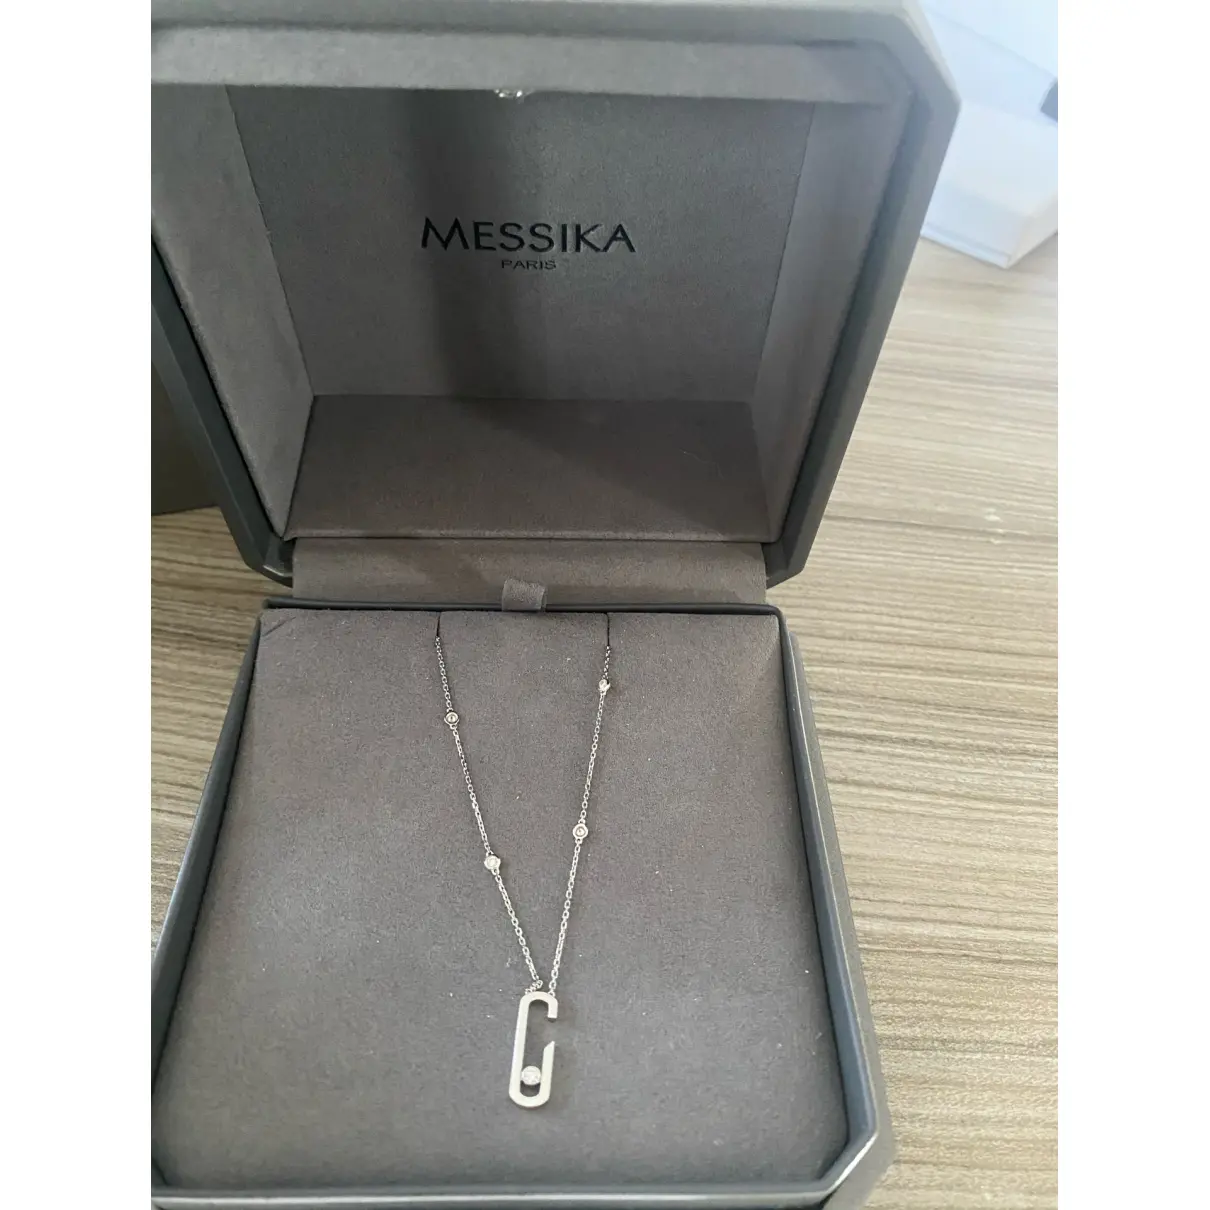 Buy Messika White gold necklace online